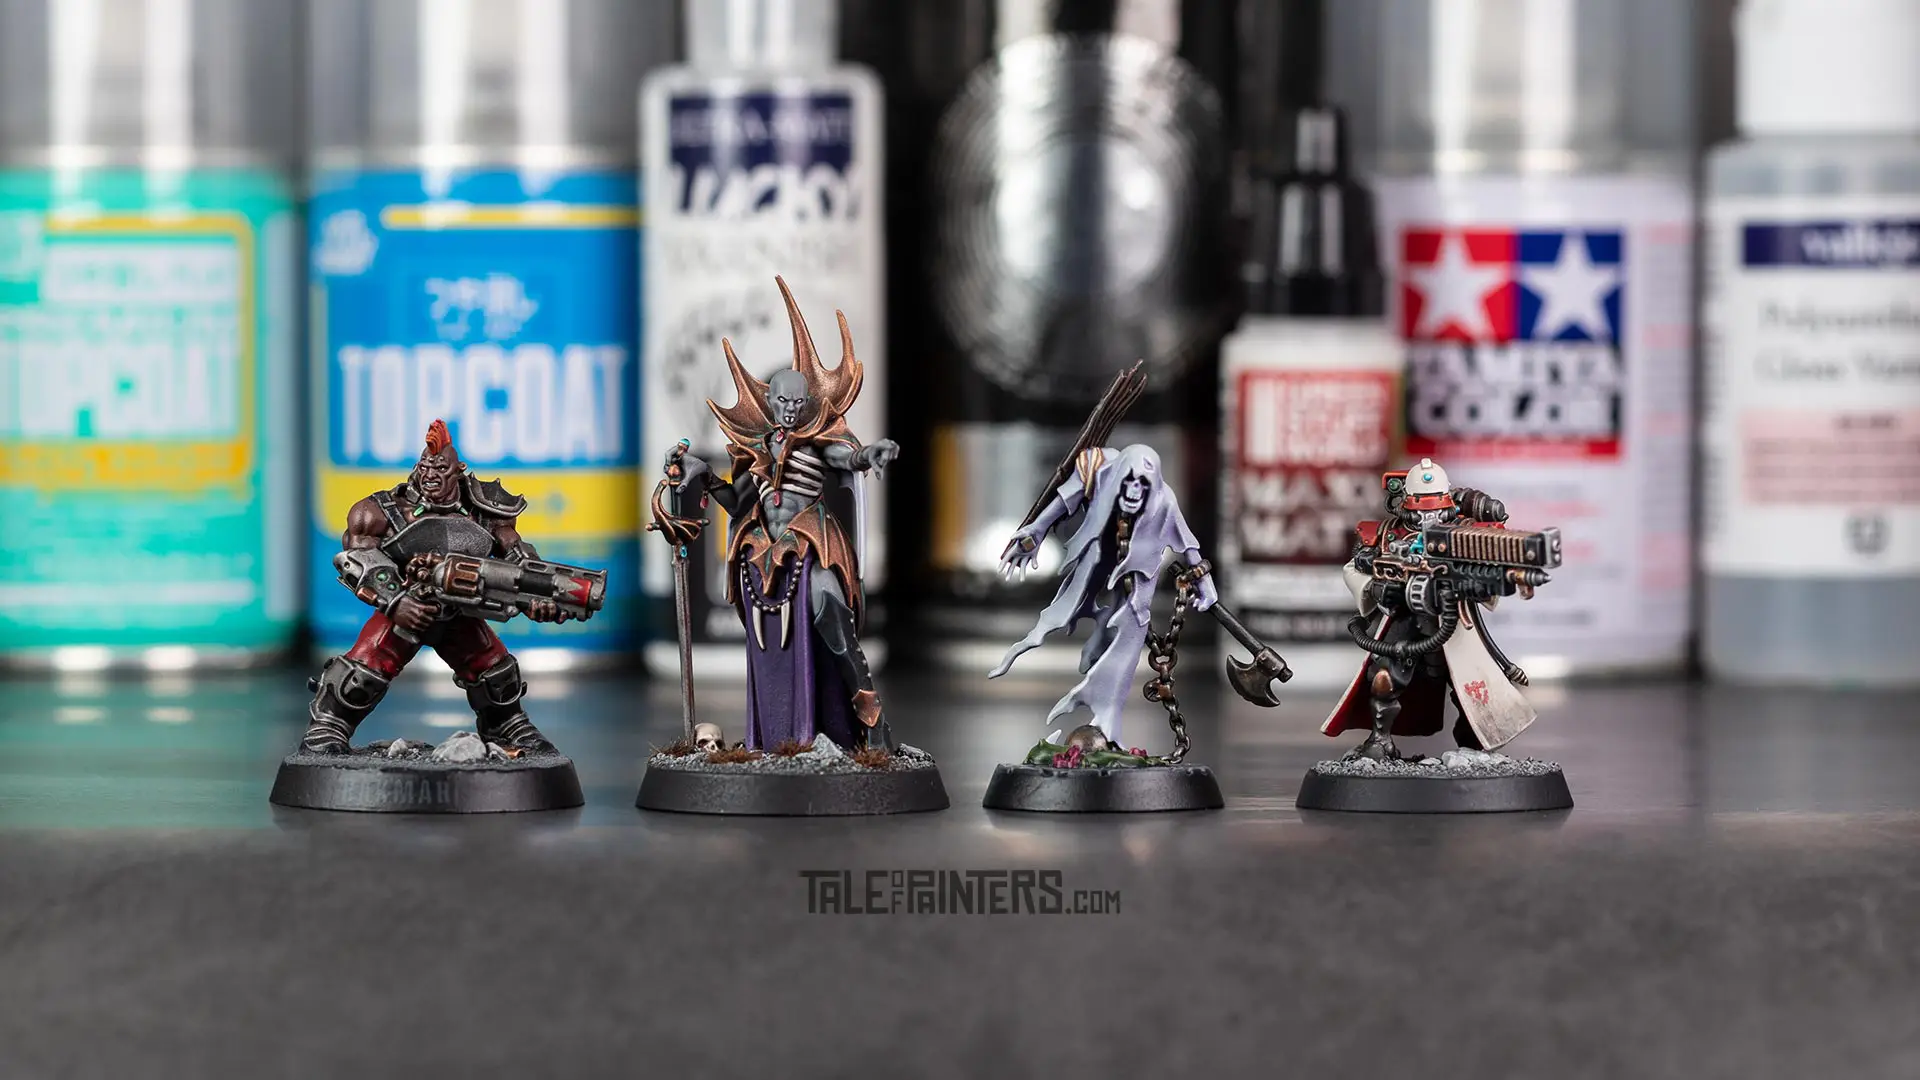 Video review: The 5 best matt varnishes for Warhammer miniatures